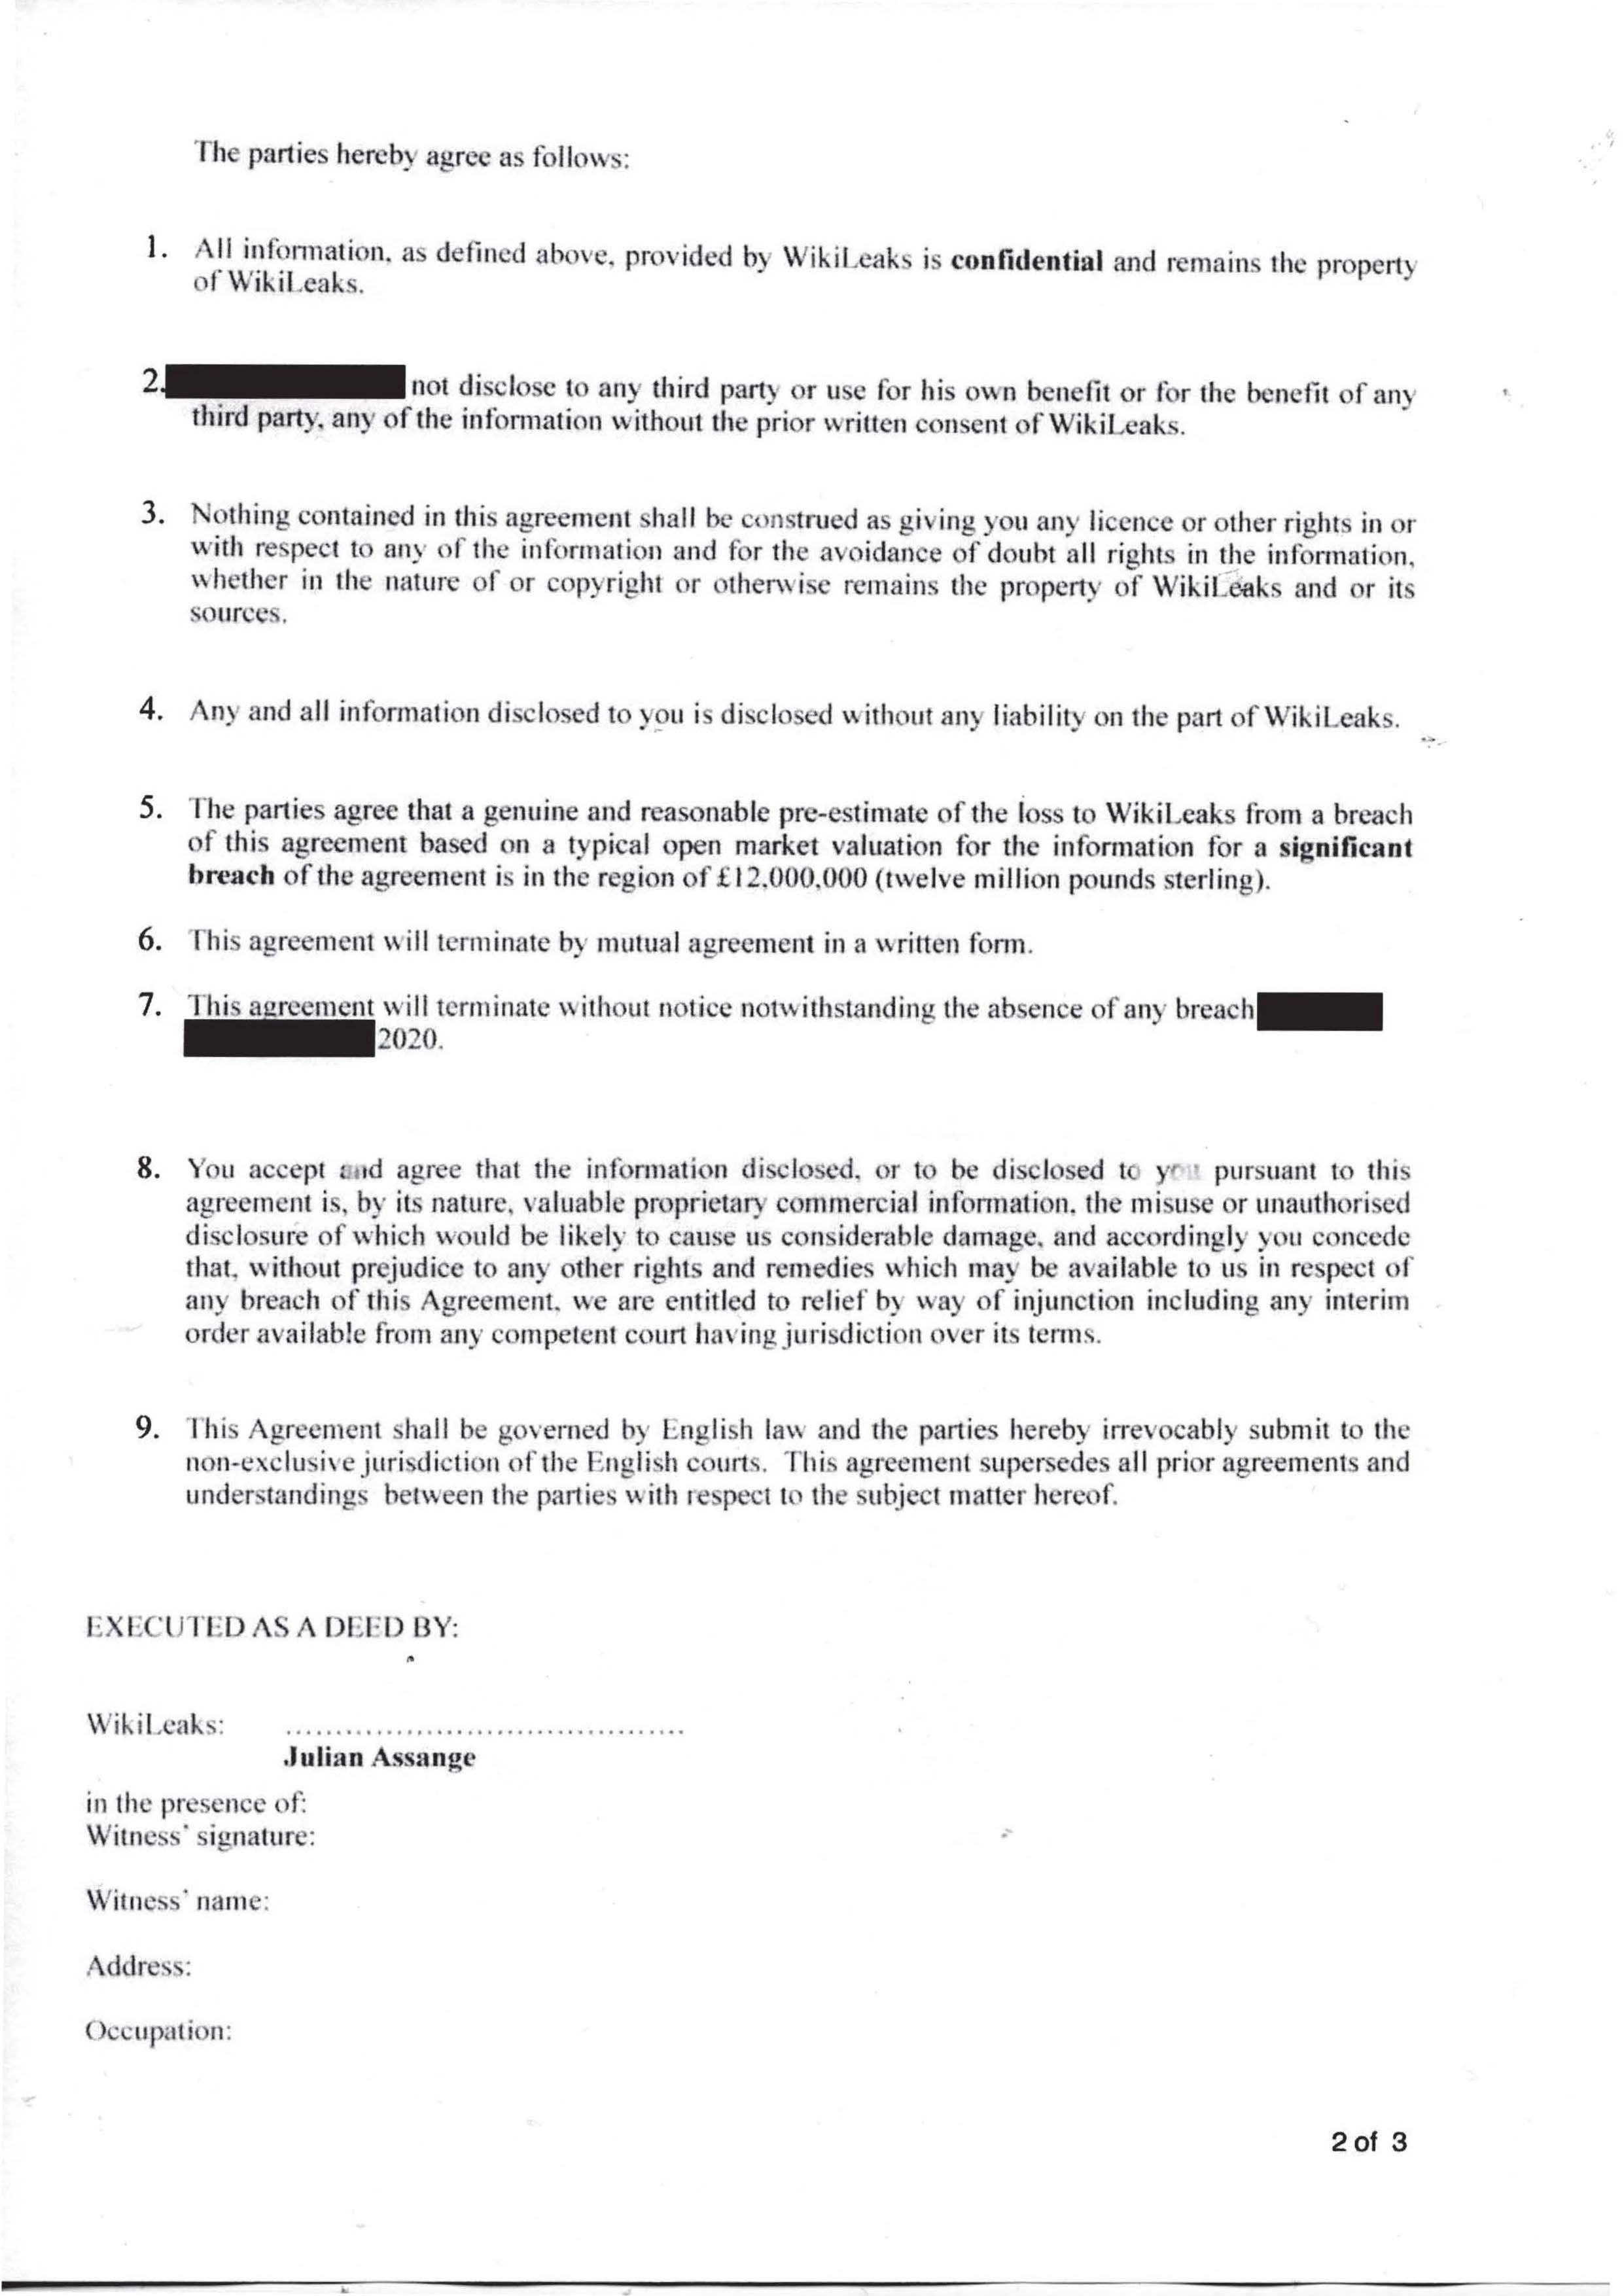 WikiLeaks Confidentiality/Non-Disclosure Agreement ...